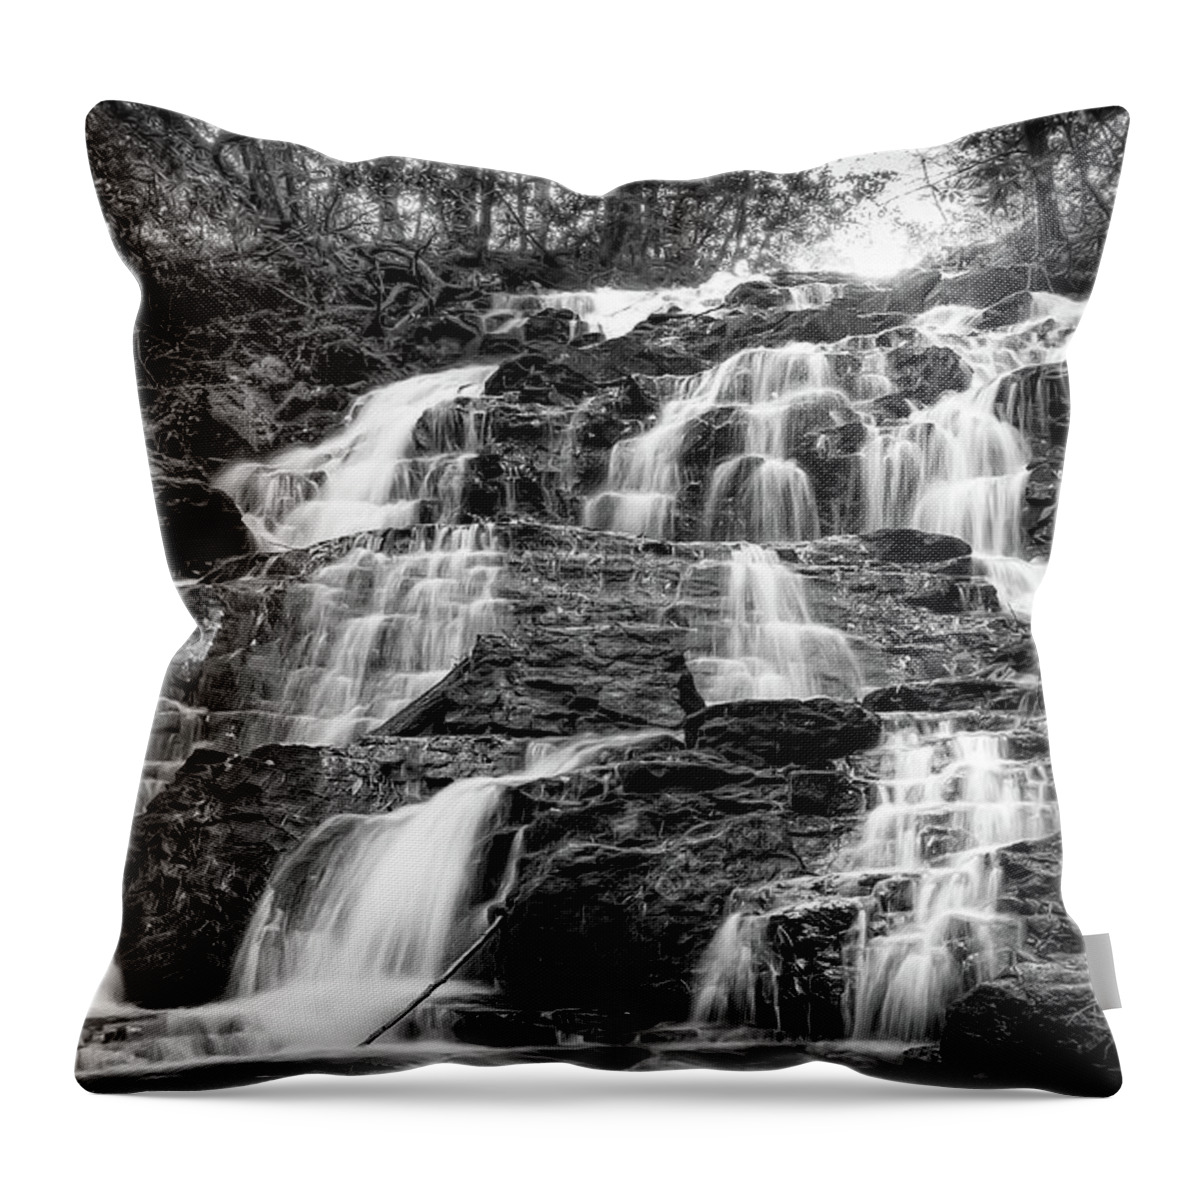 Vogel State Park Throw Pillow featuring the photograph Vogel State Park Waterfall by Anna Rumiantseva